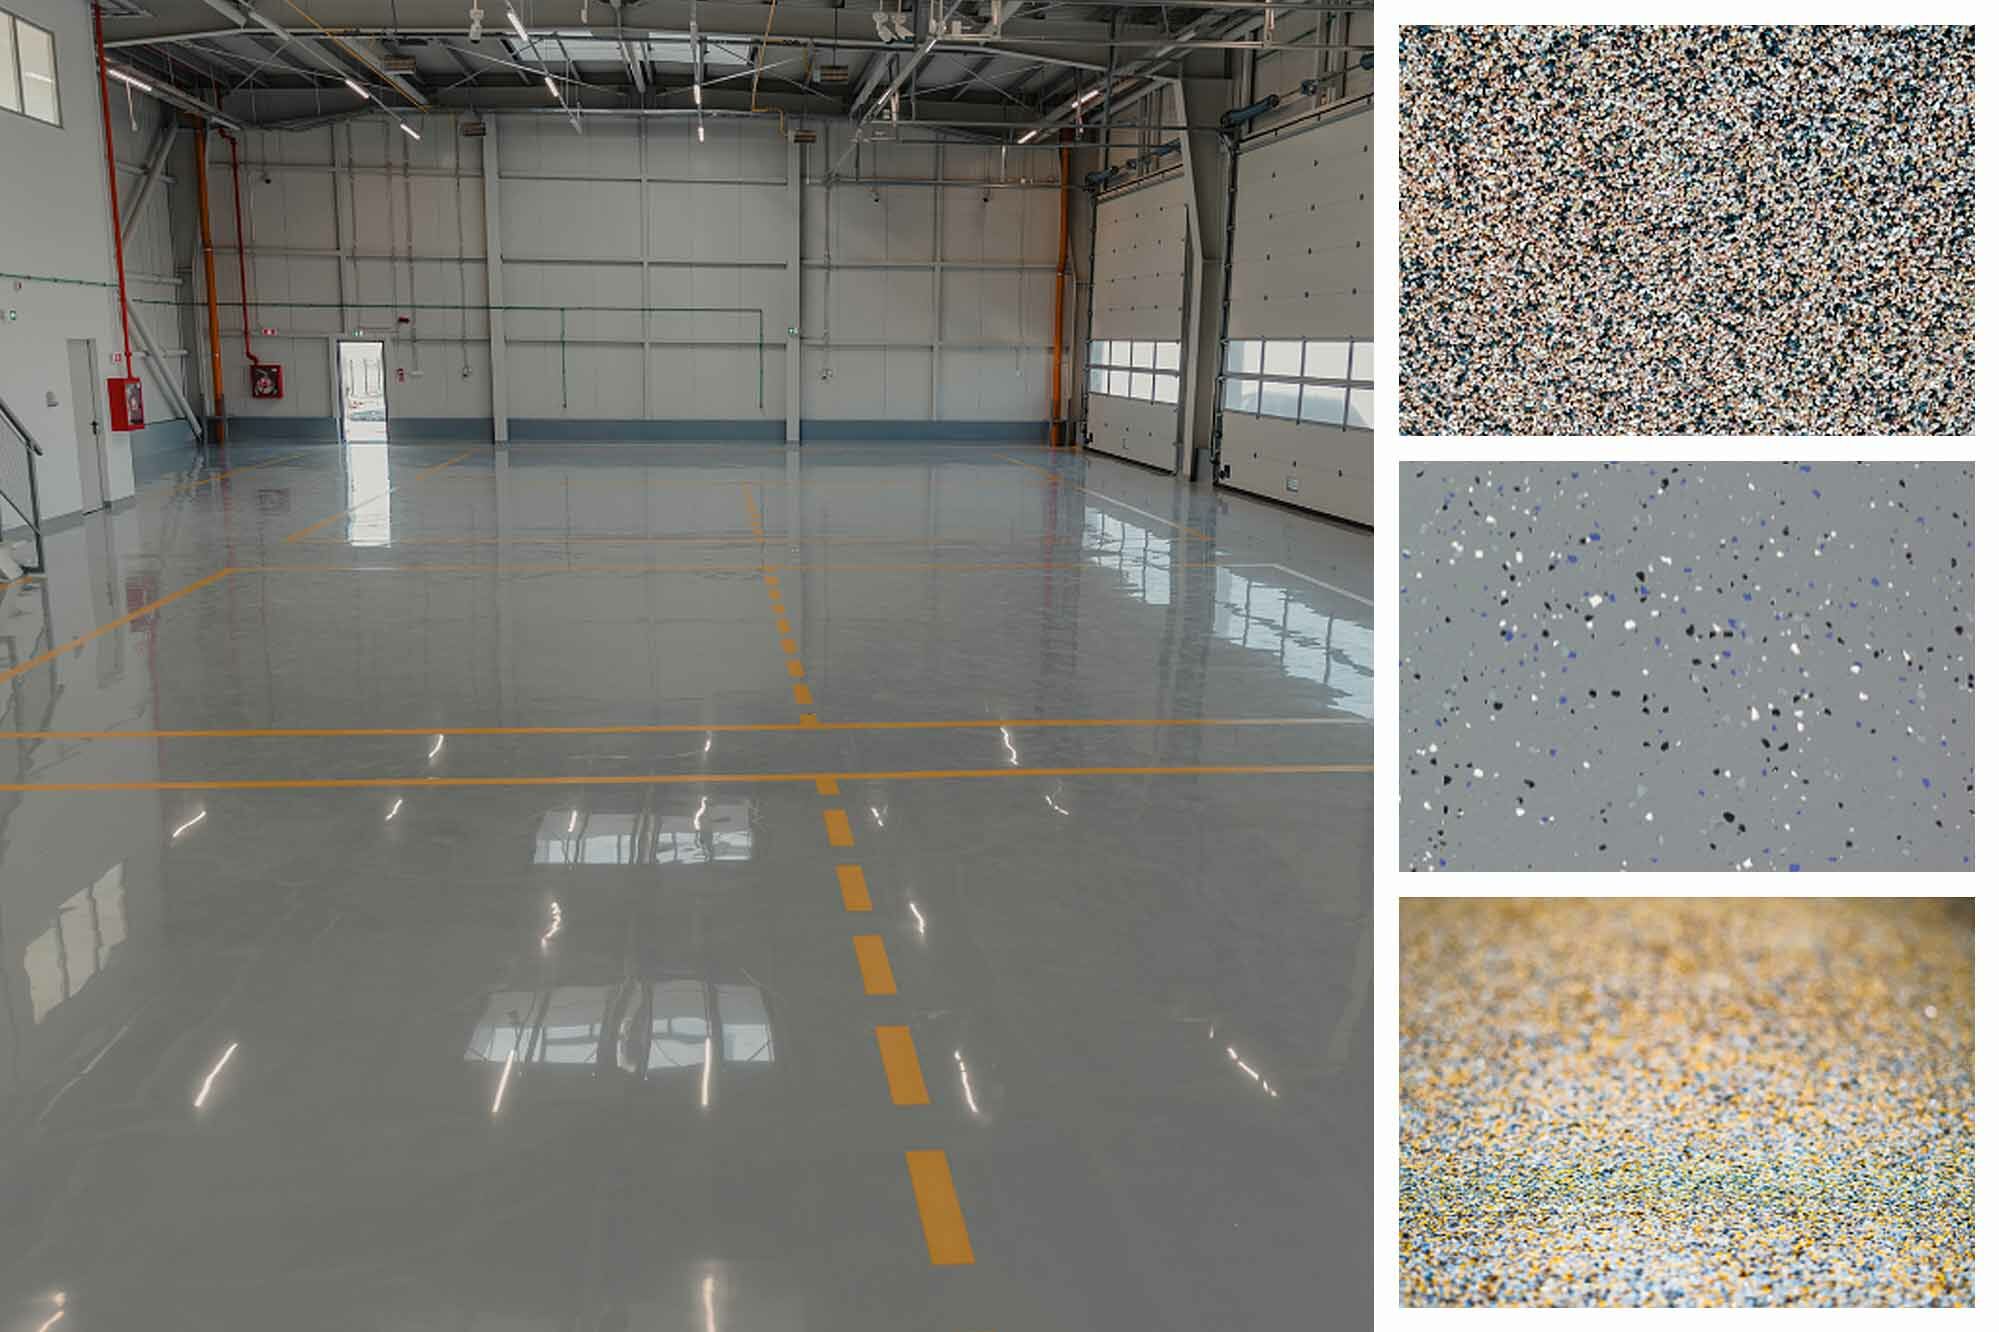 How to Measure Thickness of Epoxy Flooring